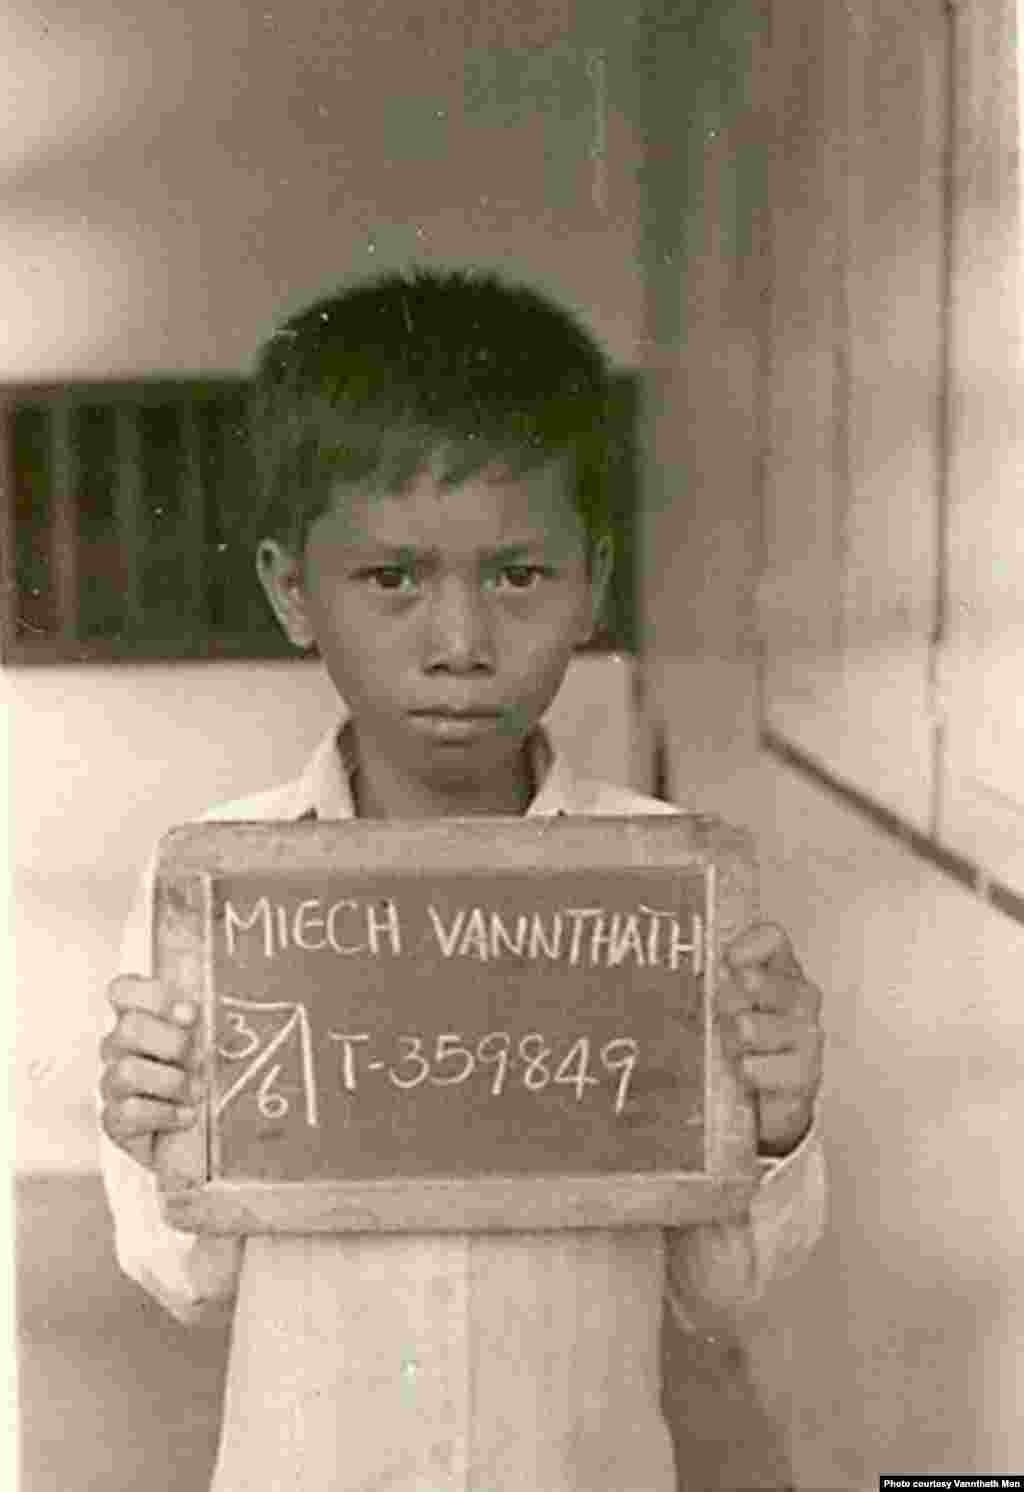 Vannthath Man arrived in the US from Cambodia in 1989 at age 12. (Photo courtesy Vannthath Man)